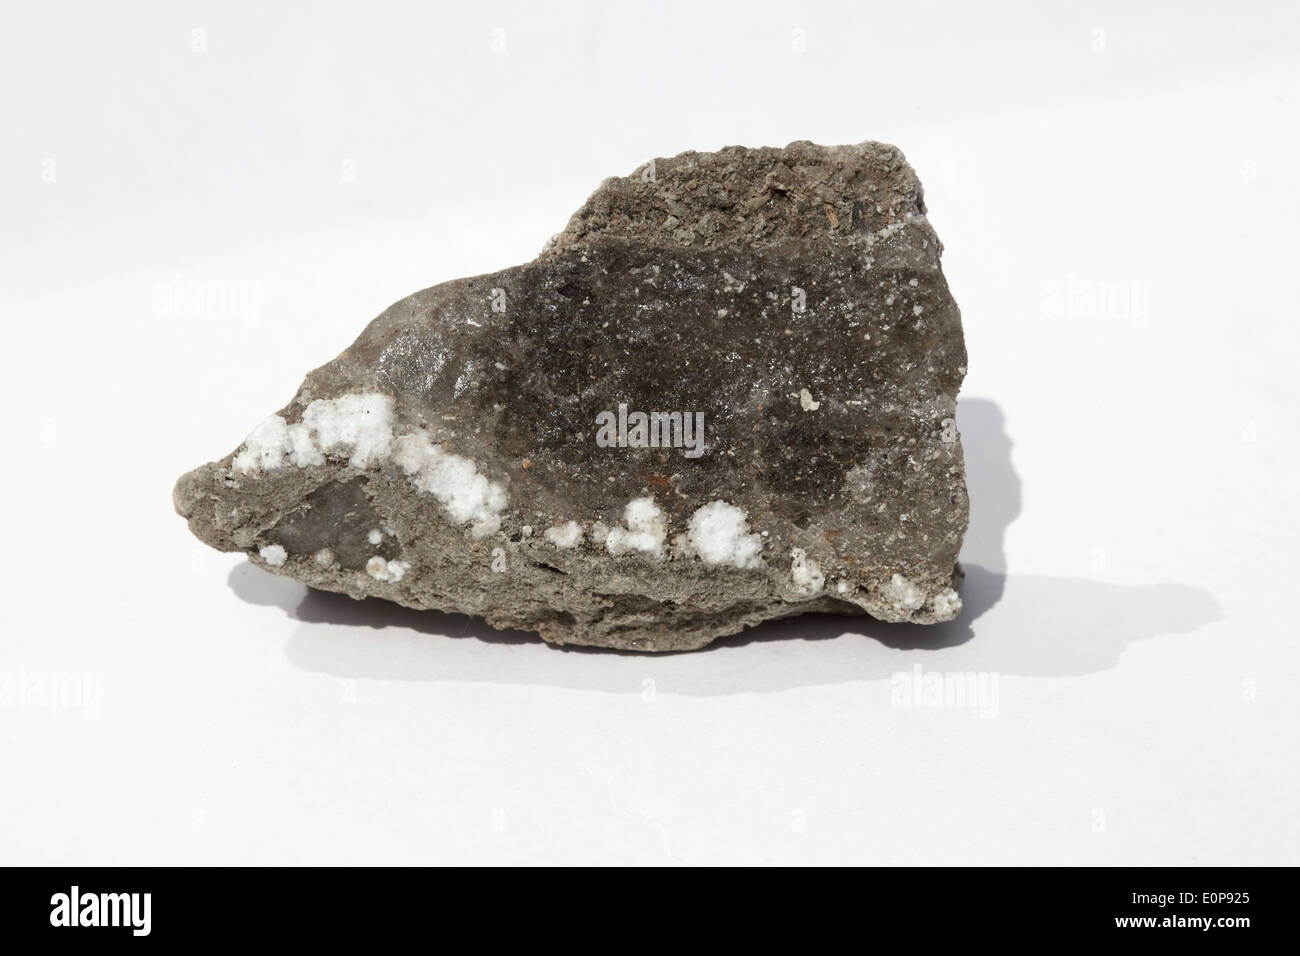 Rock ingrained with salt crystals. Stock Photo